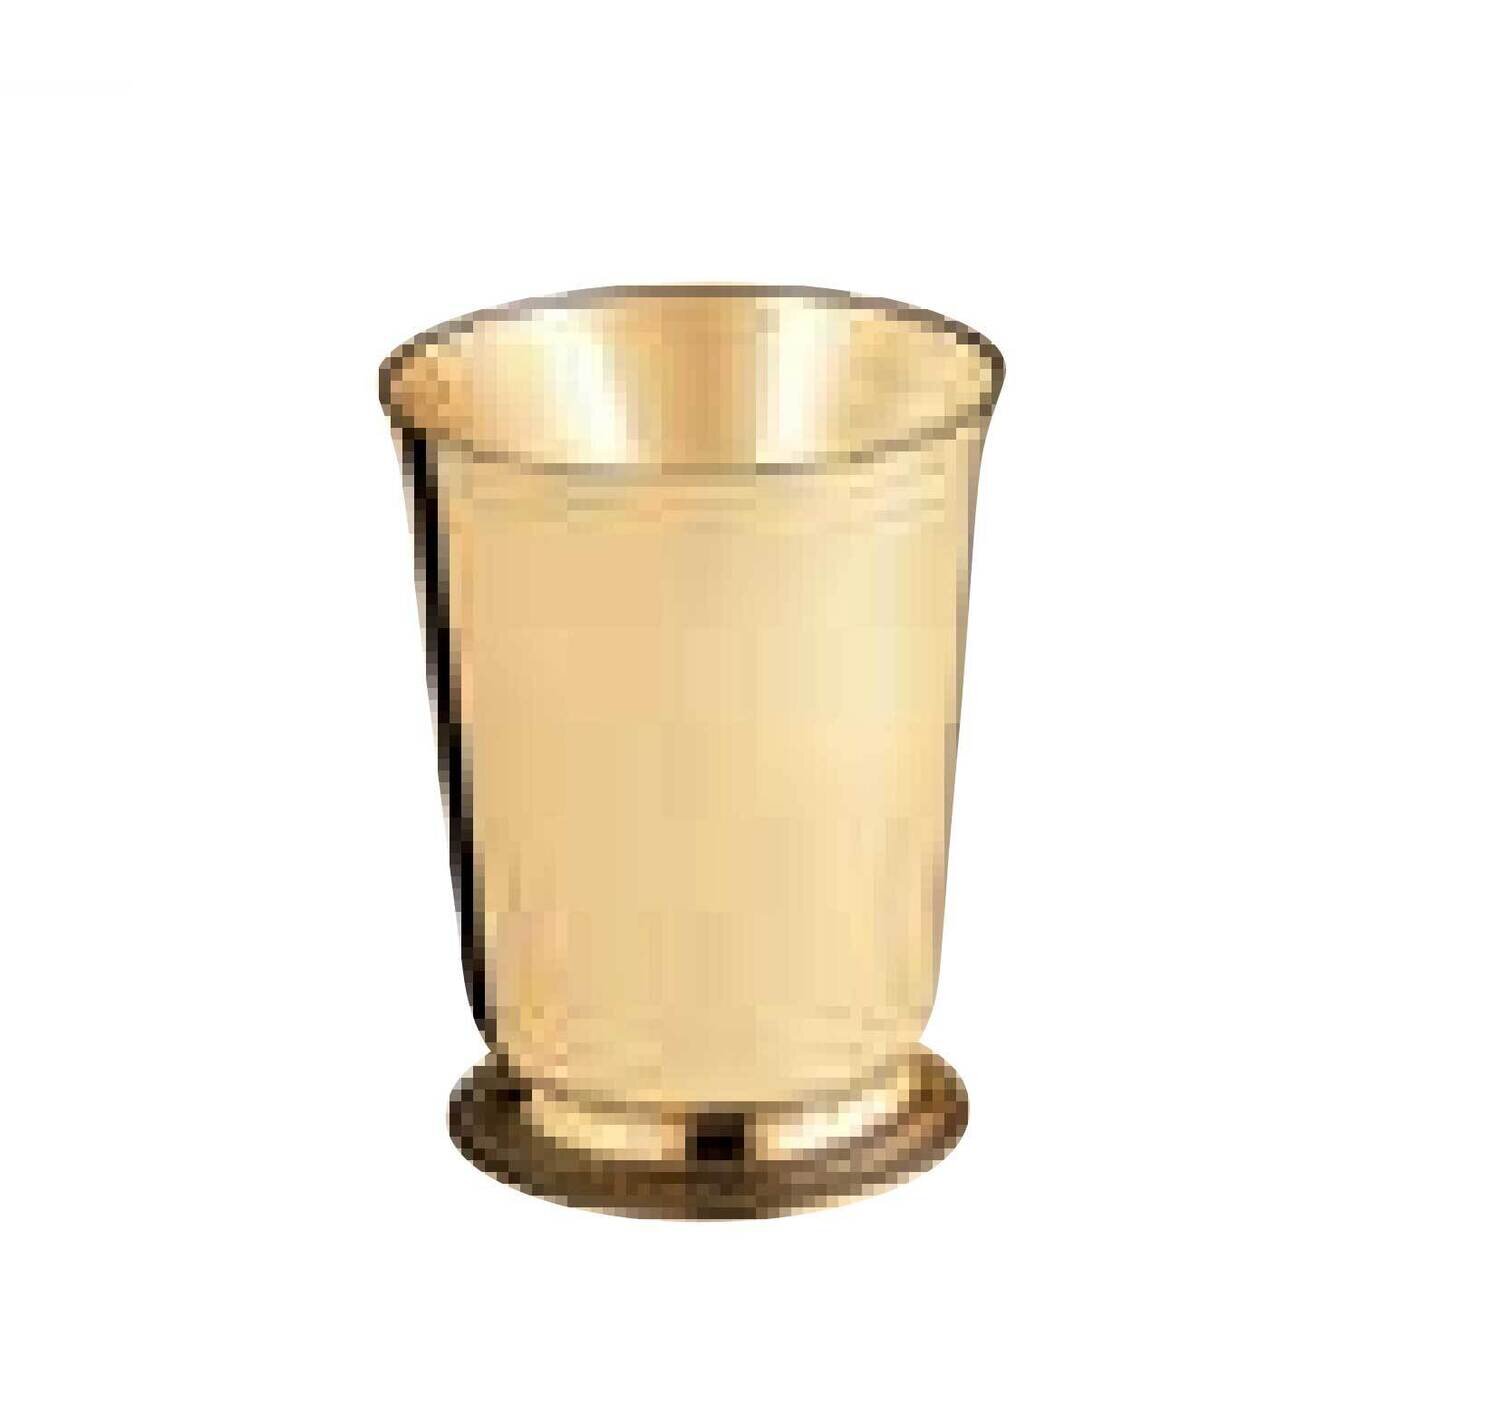 Ercuis Empire Tumbler 3.75 Inch Gold Plated F500138208